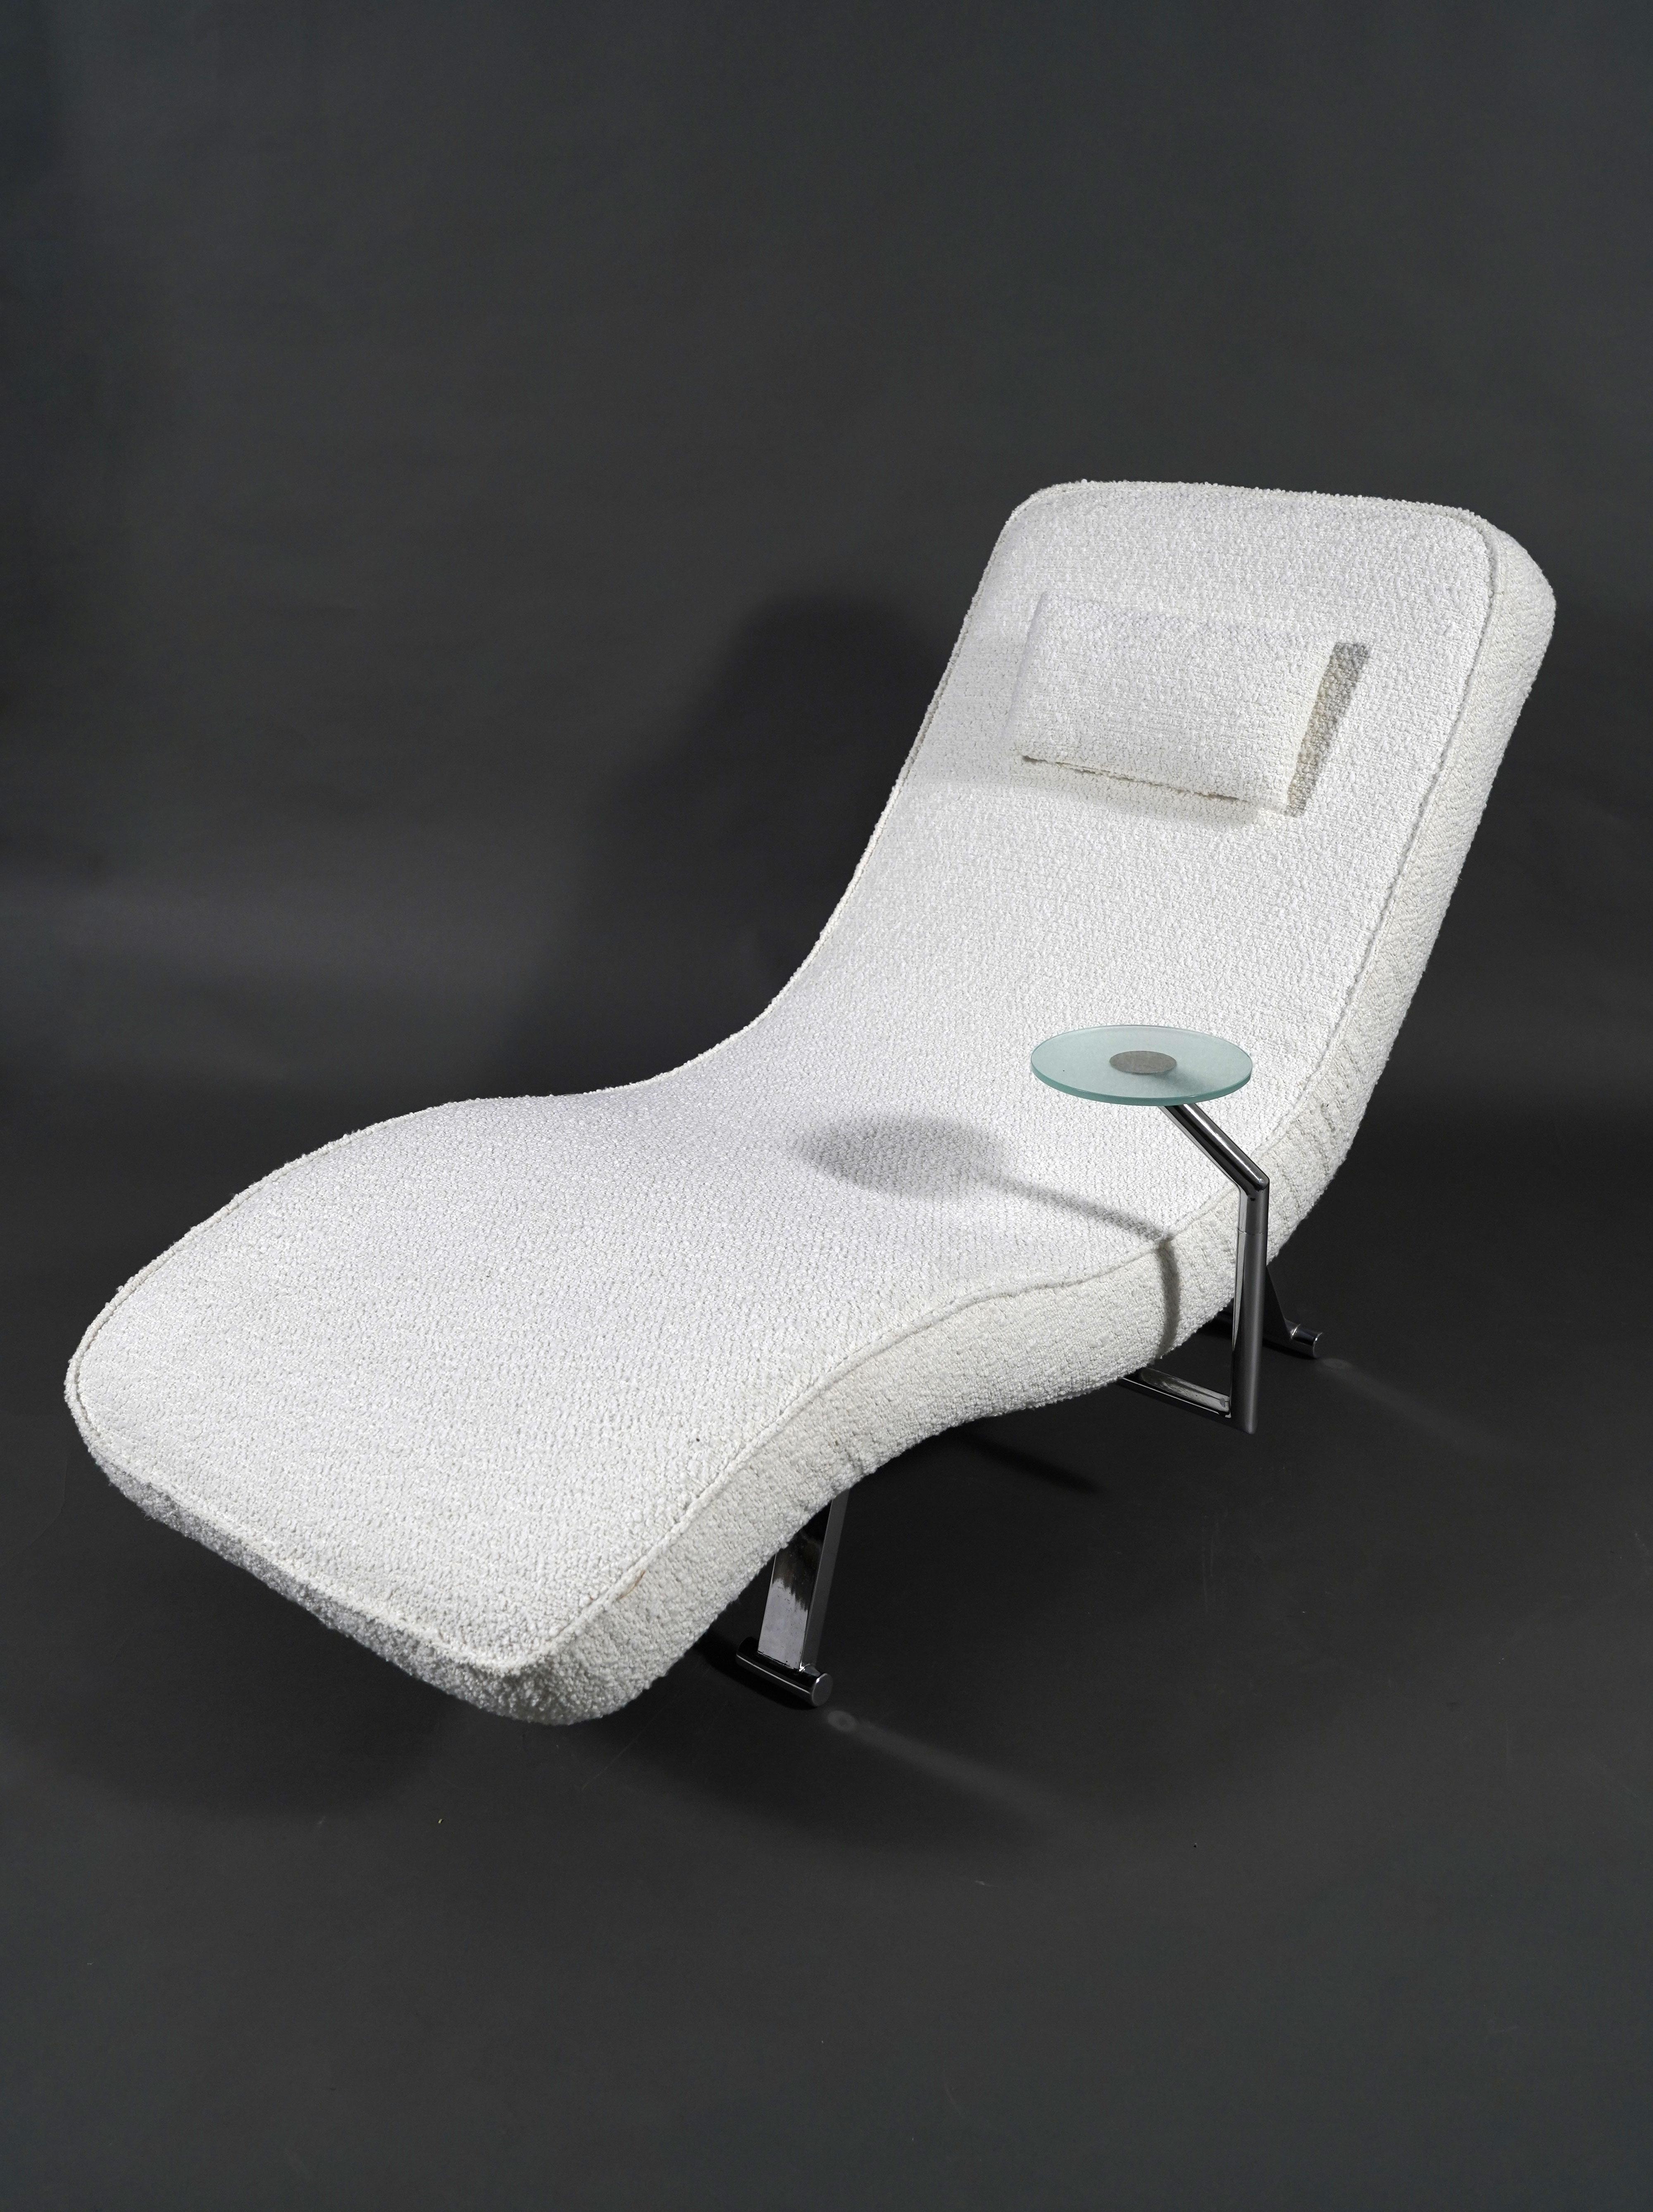 Beautiful Chaise lounge with adjustable backrest covered in an off-white bouclé fabric.
Complemented by a rotating glass side table.
It rests on a chrome-plated metal base.